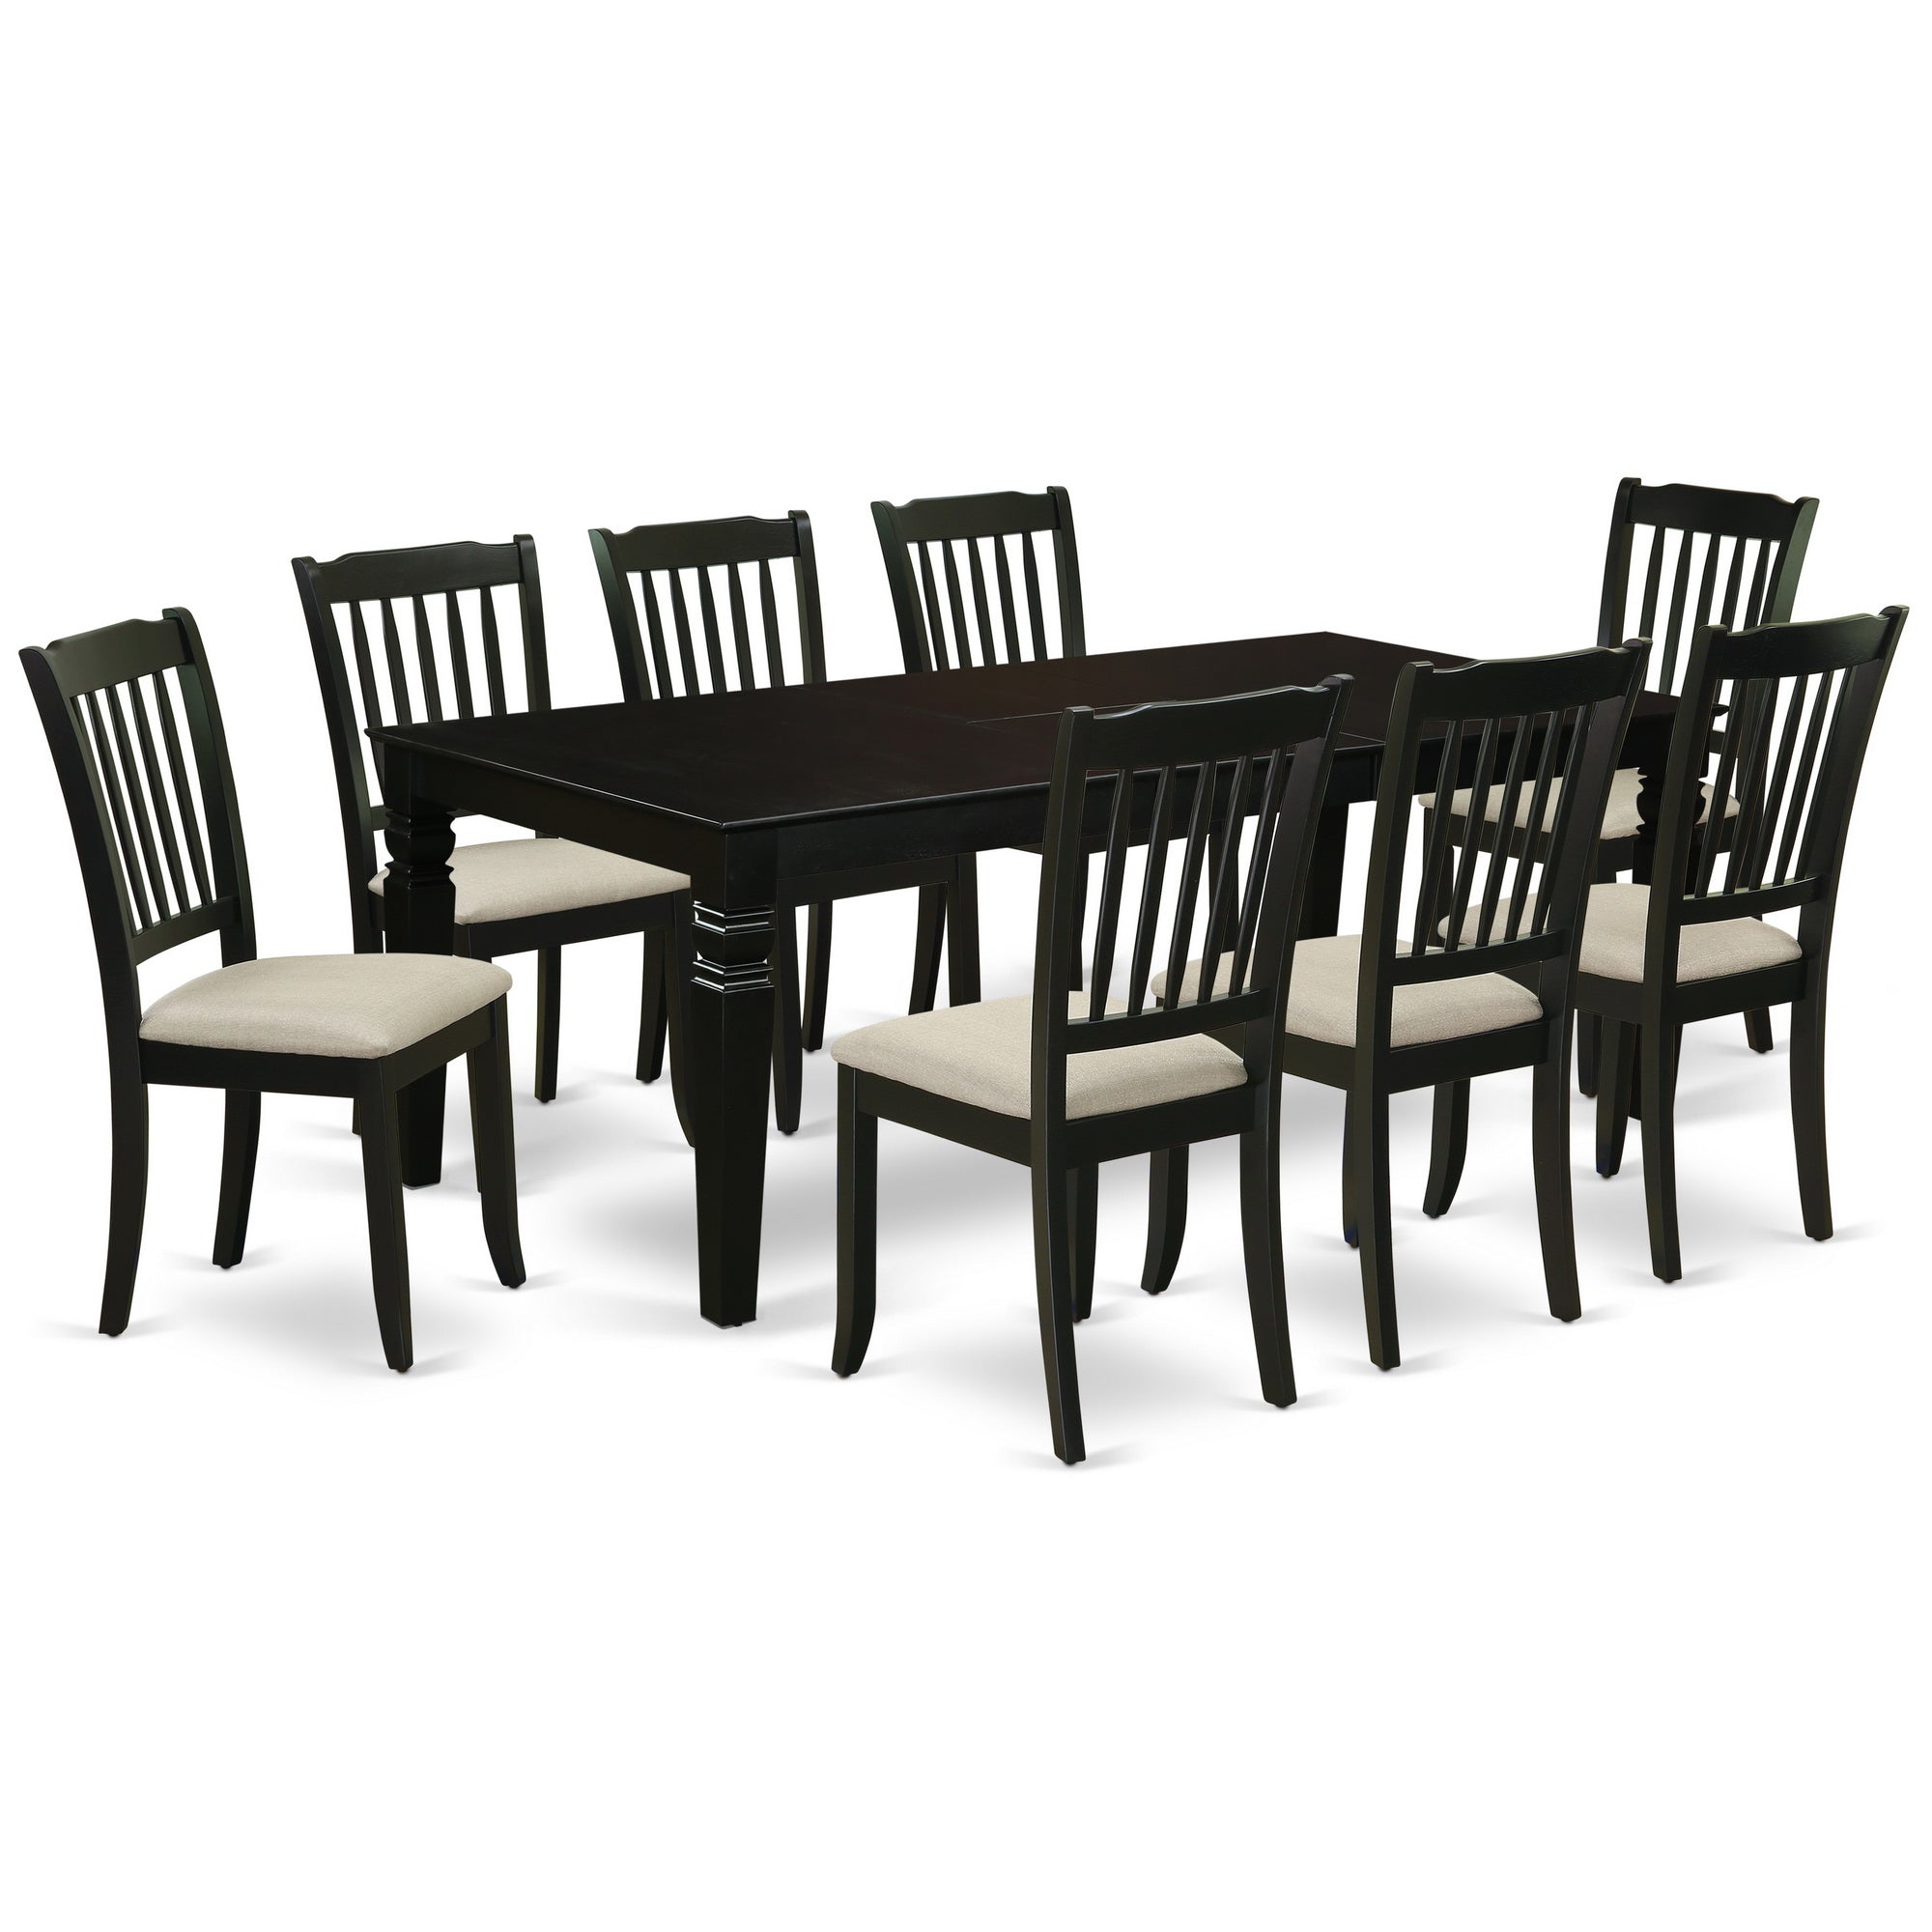 LGDA9-BLK-C 9Pc Dining Set Includes a Rectangle Dining Table with Butterfly Leaf and Eight Vertical Slatted Microfiber Seat Kitchen Chairs, Black Finish